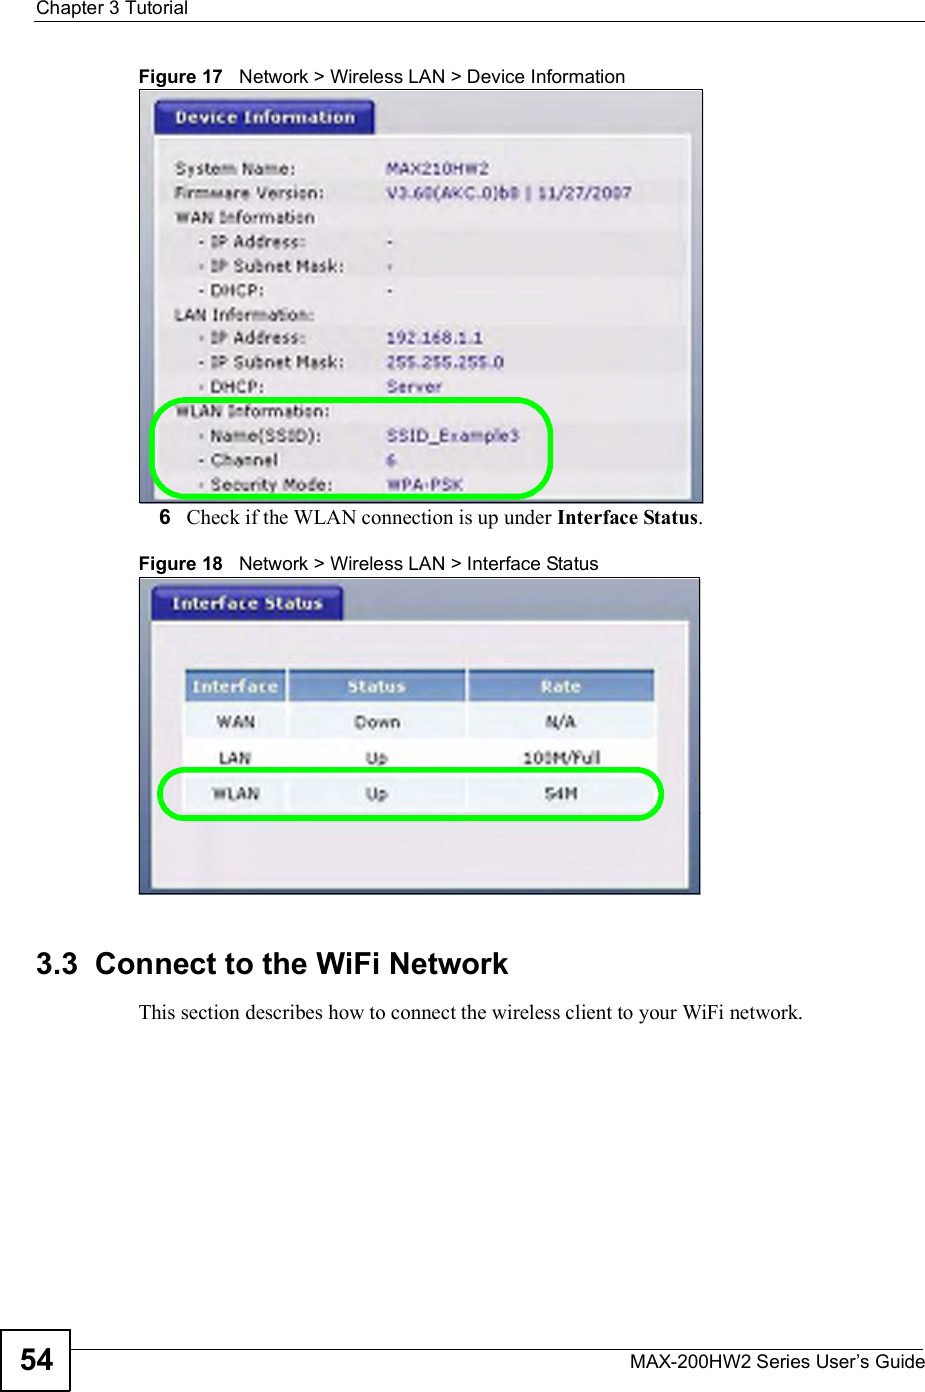 Chapter 3TutorialMAX-200HW2 Series User s Guide54Figure 17   Network &gt; Wireless LAN &gt; Device Information6Check if the WLAN connection is up under Interface Status.Figure 18   Network &gt; Wireless LAN &gt; Interface Status3.3  Connect to the WiFi NetworkThis section describes how to connect the wireless client to your WiFi network.